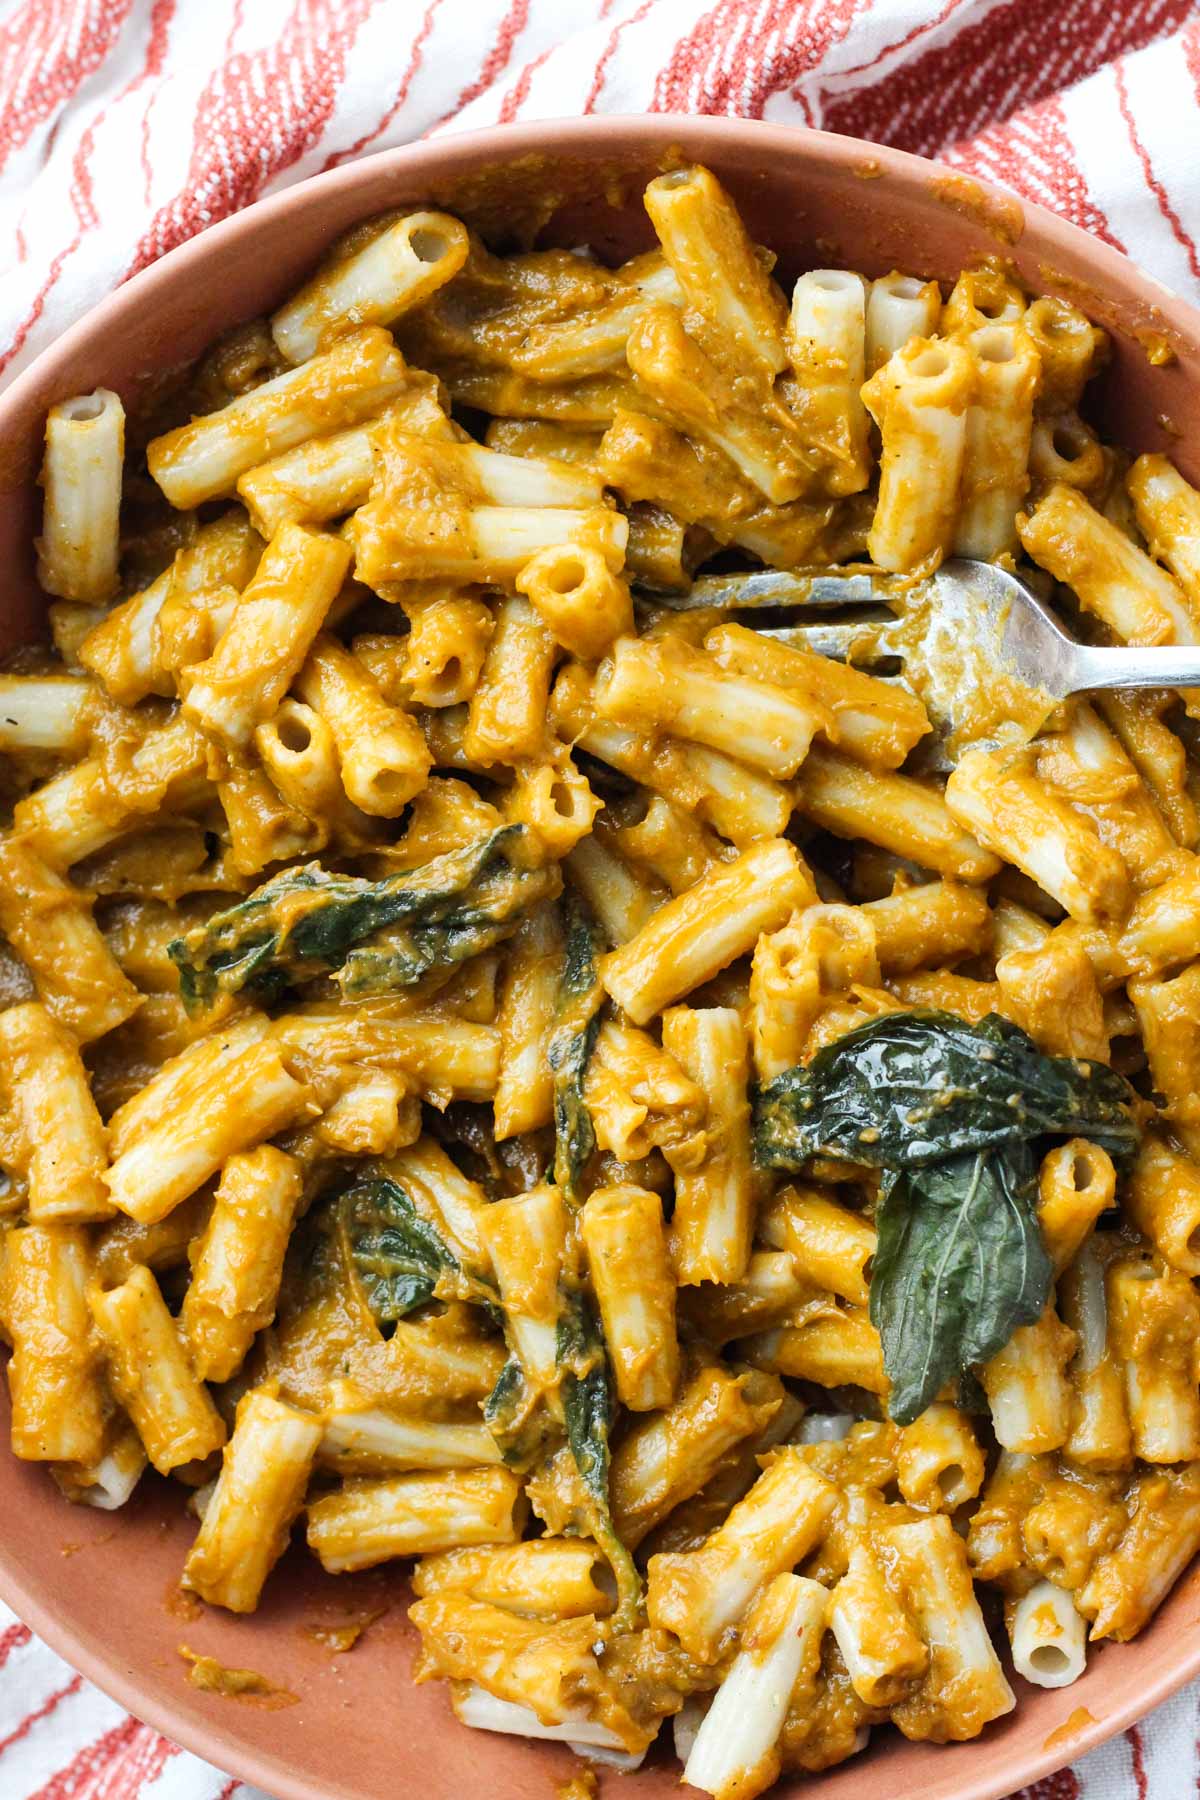 Pasta smothered in fresh sauce and topped with basil leaves.